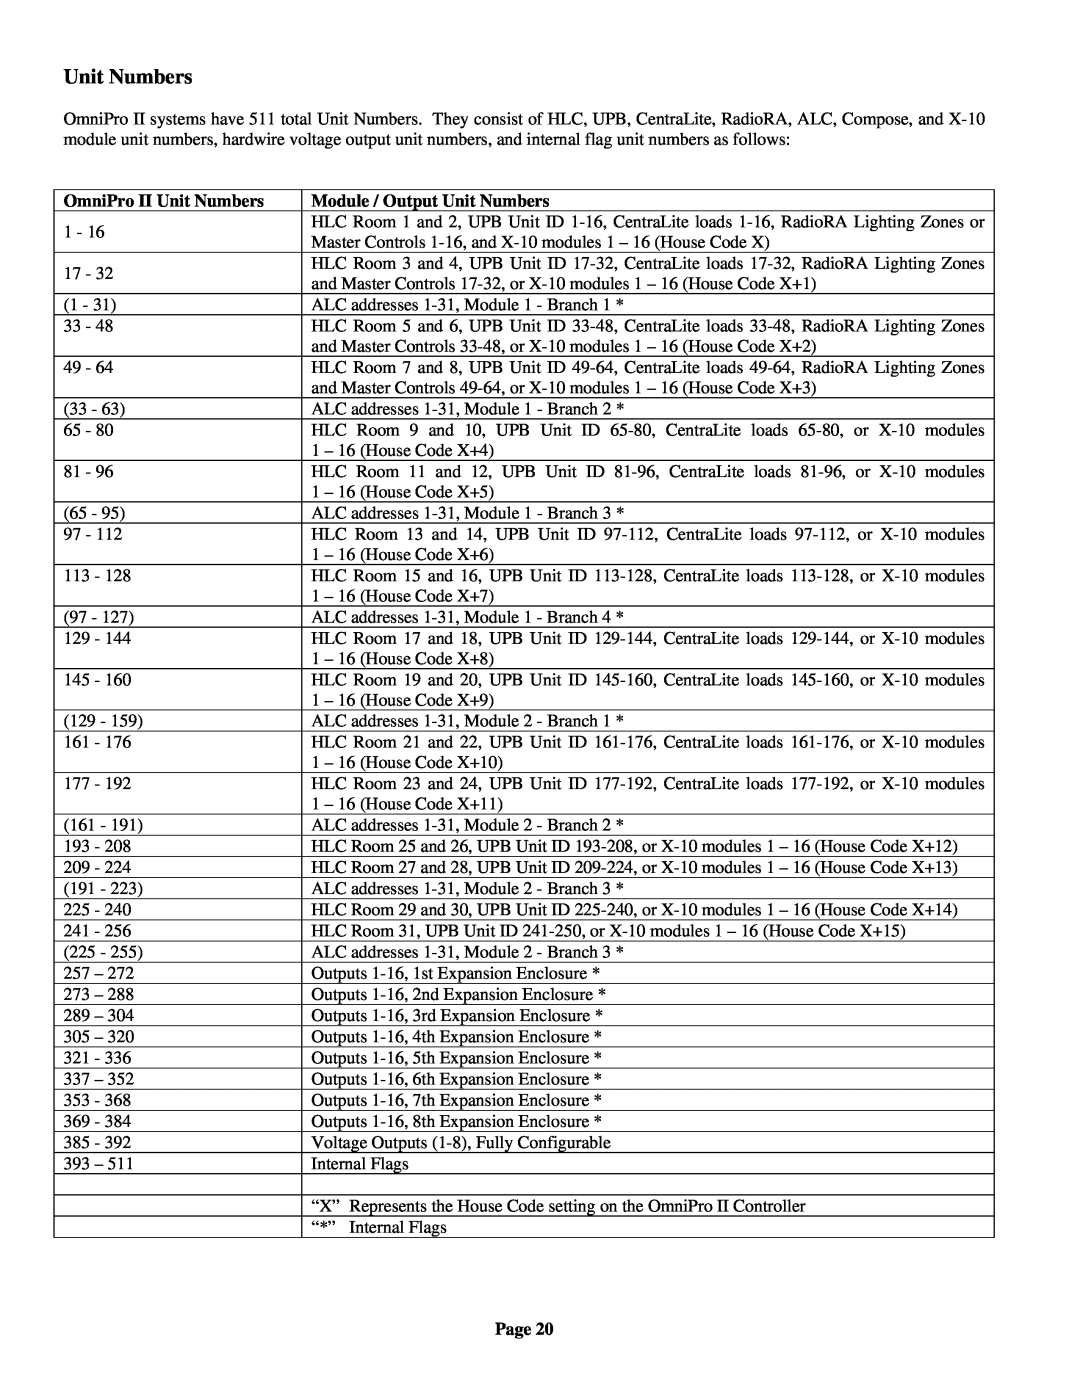 Home Automation owner manual OmniPro II Unit Numbers, Module / Output Unit Numbers, Page 